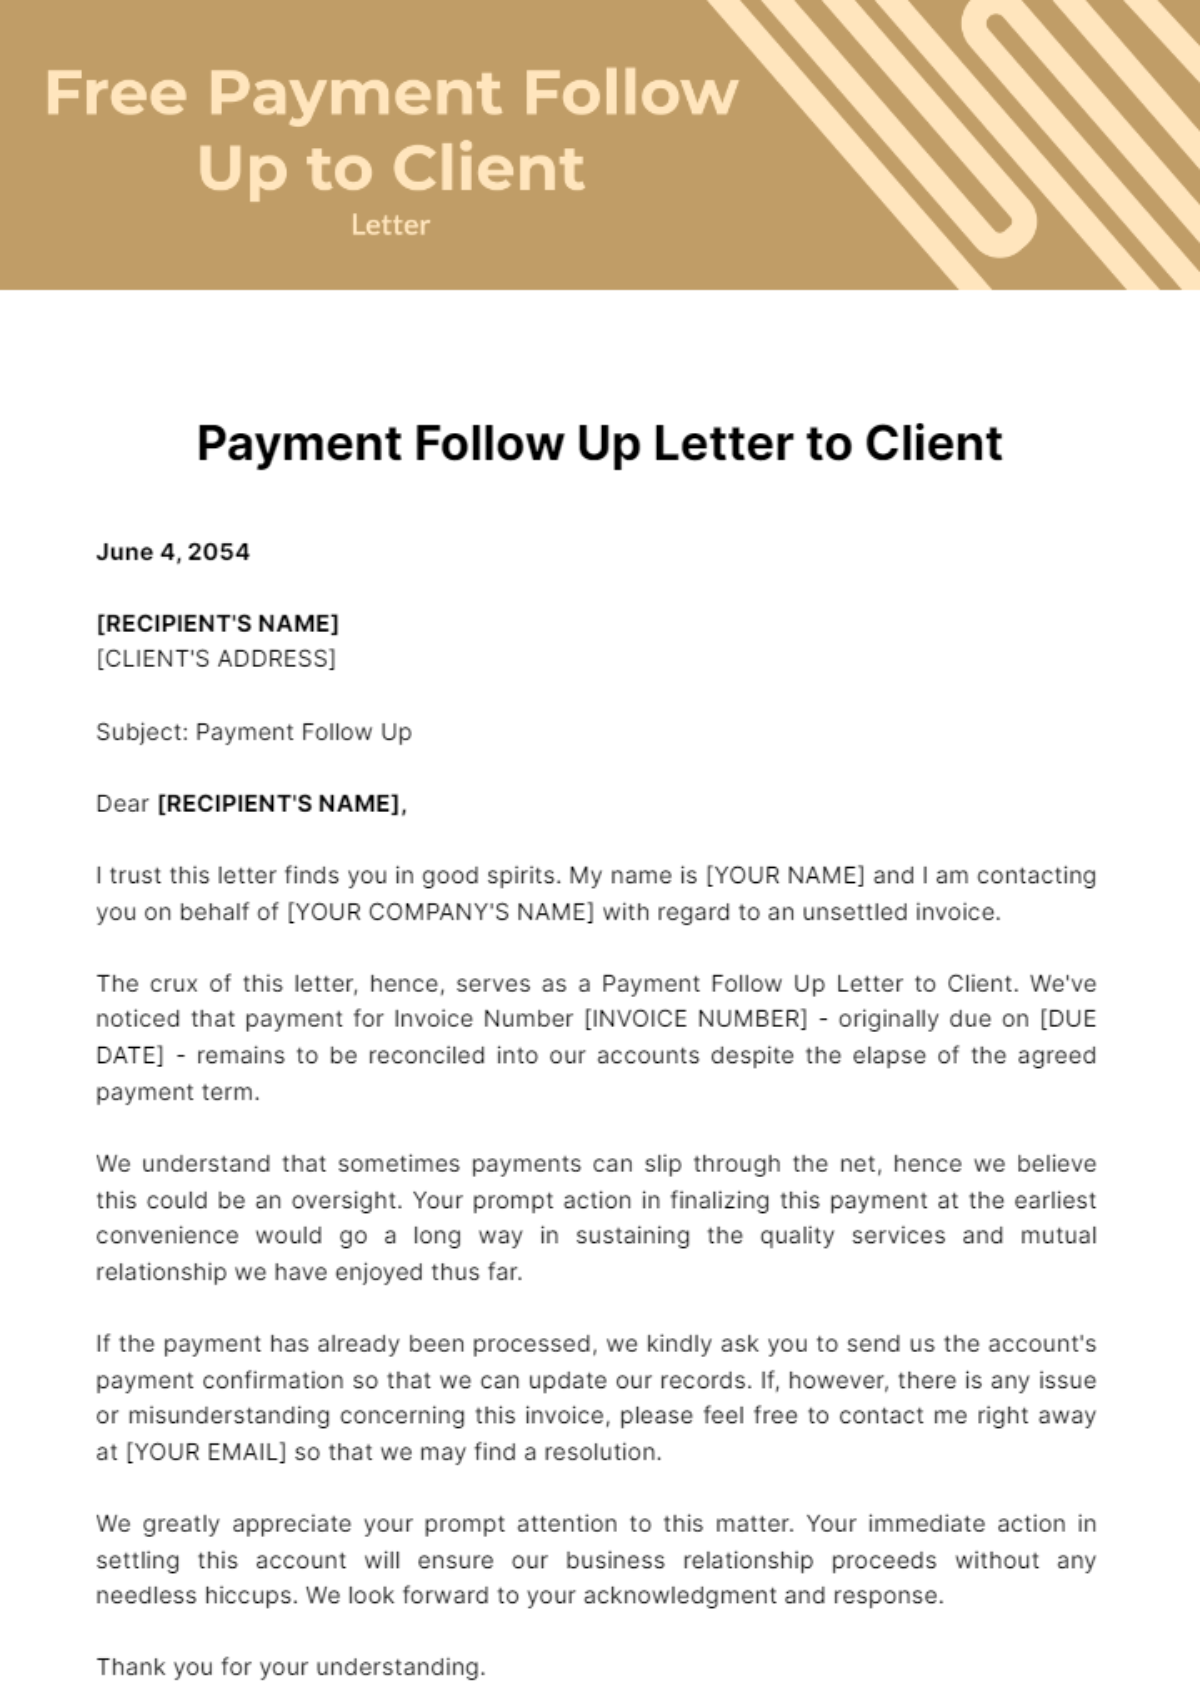 Free Payment Follow Up Letter to Client Template